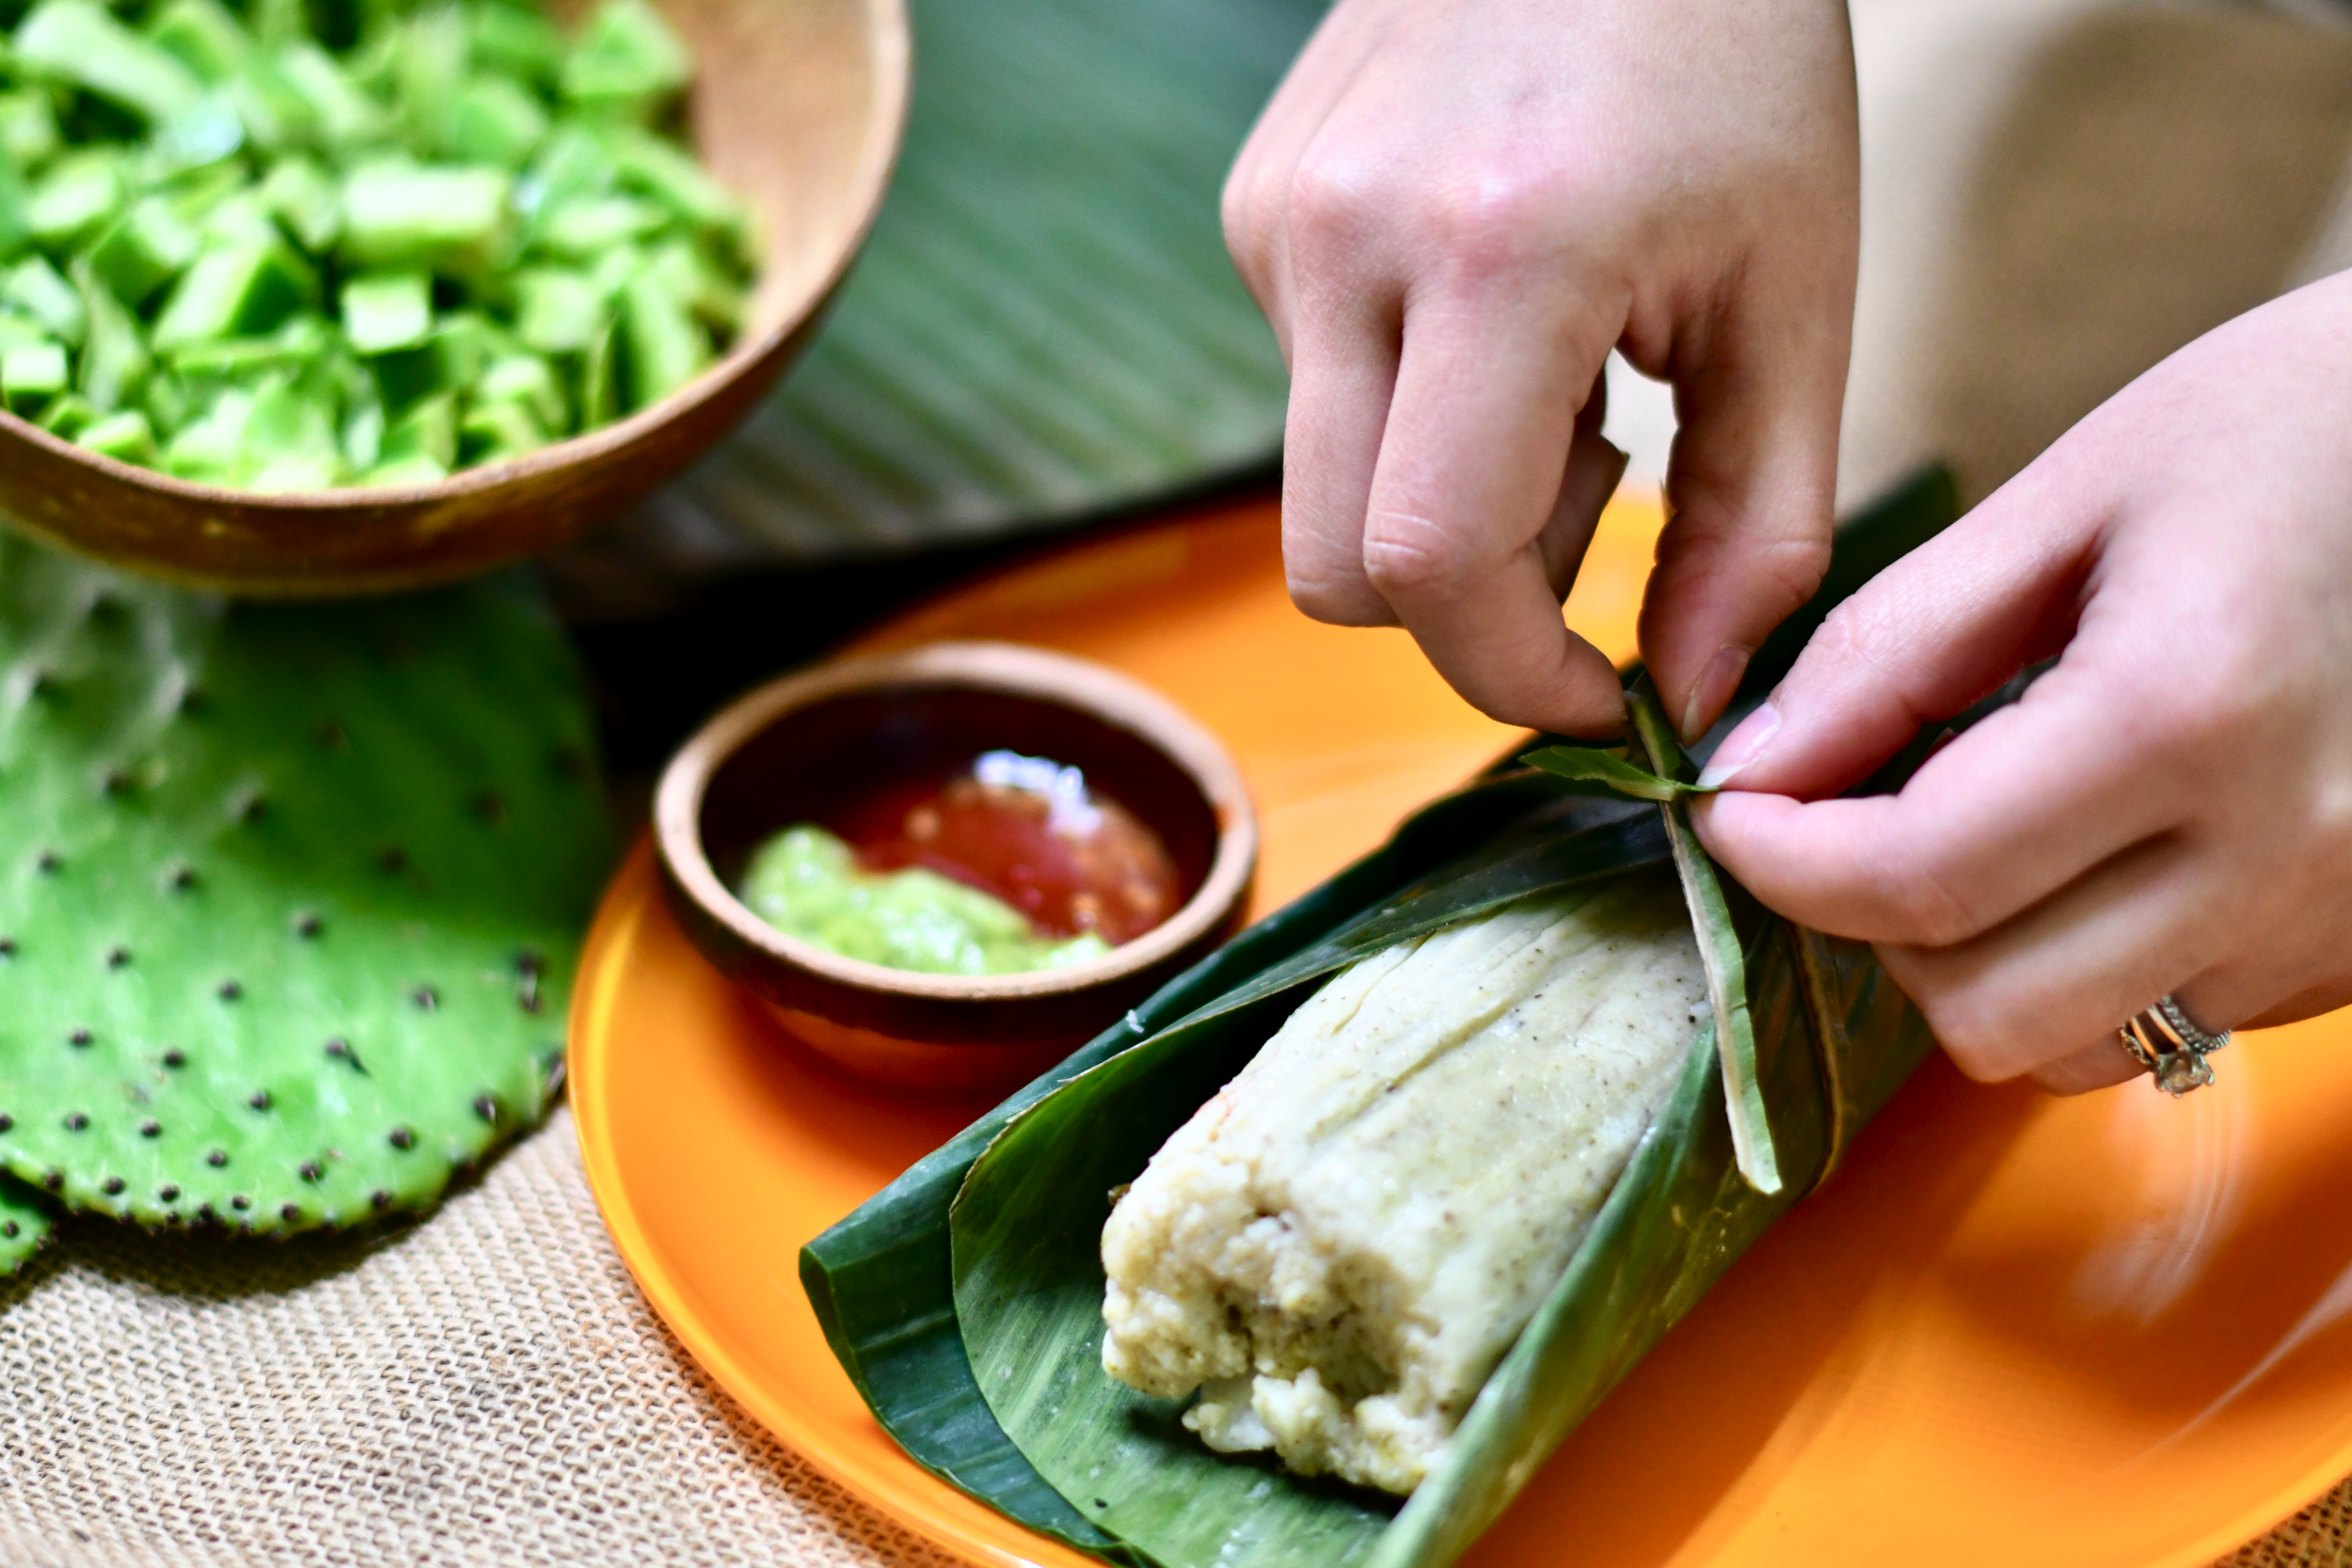 Cooking Class: Making Tamales